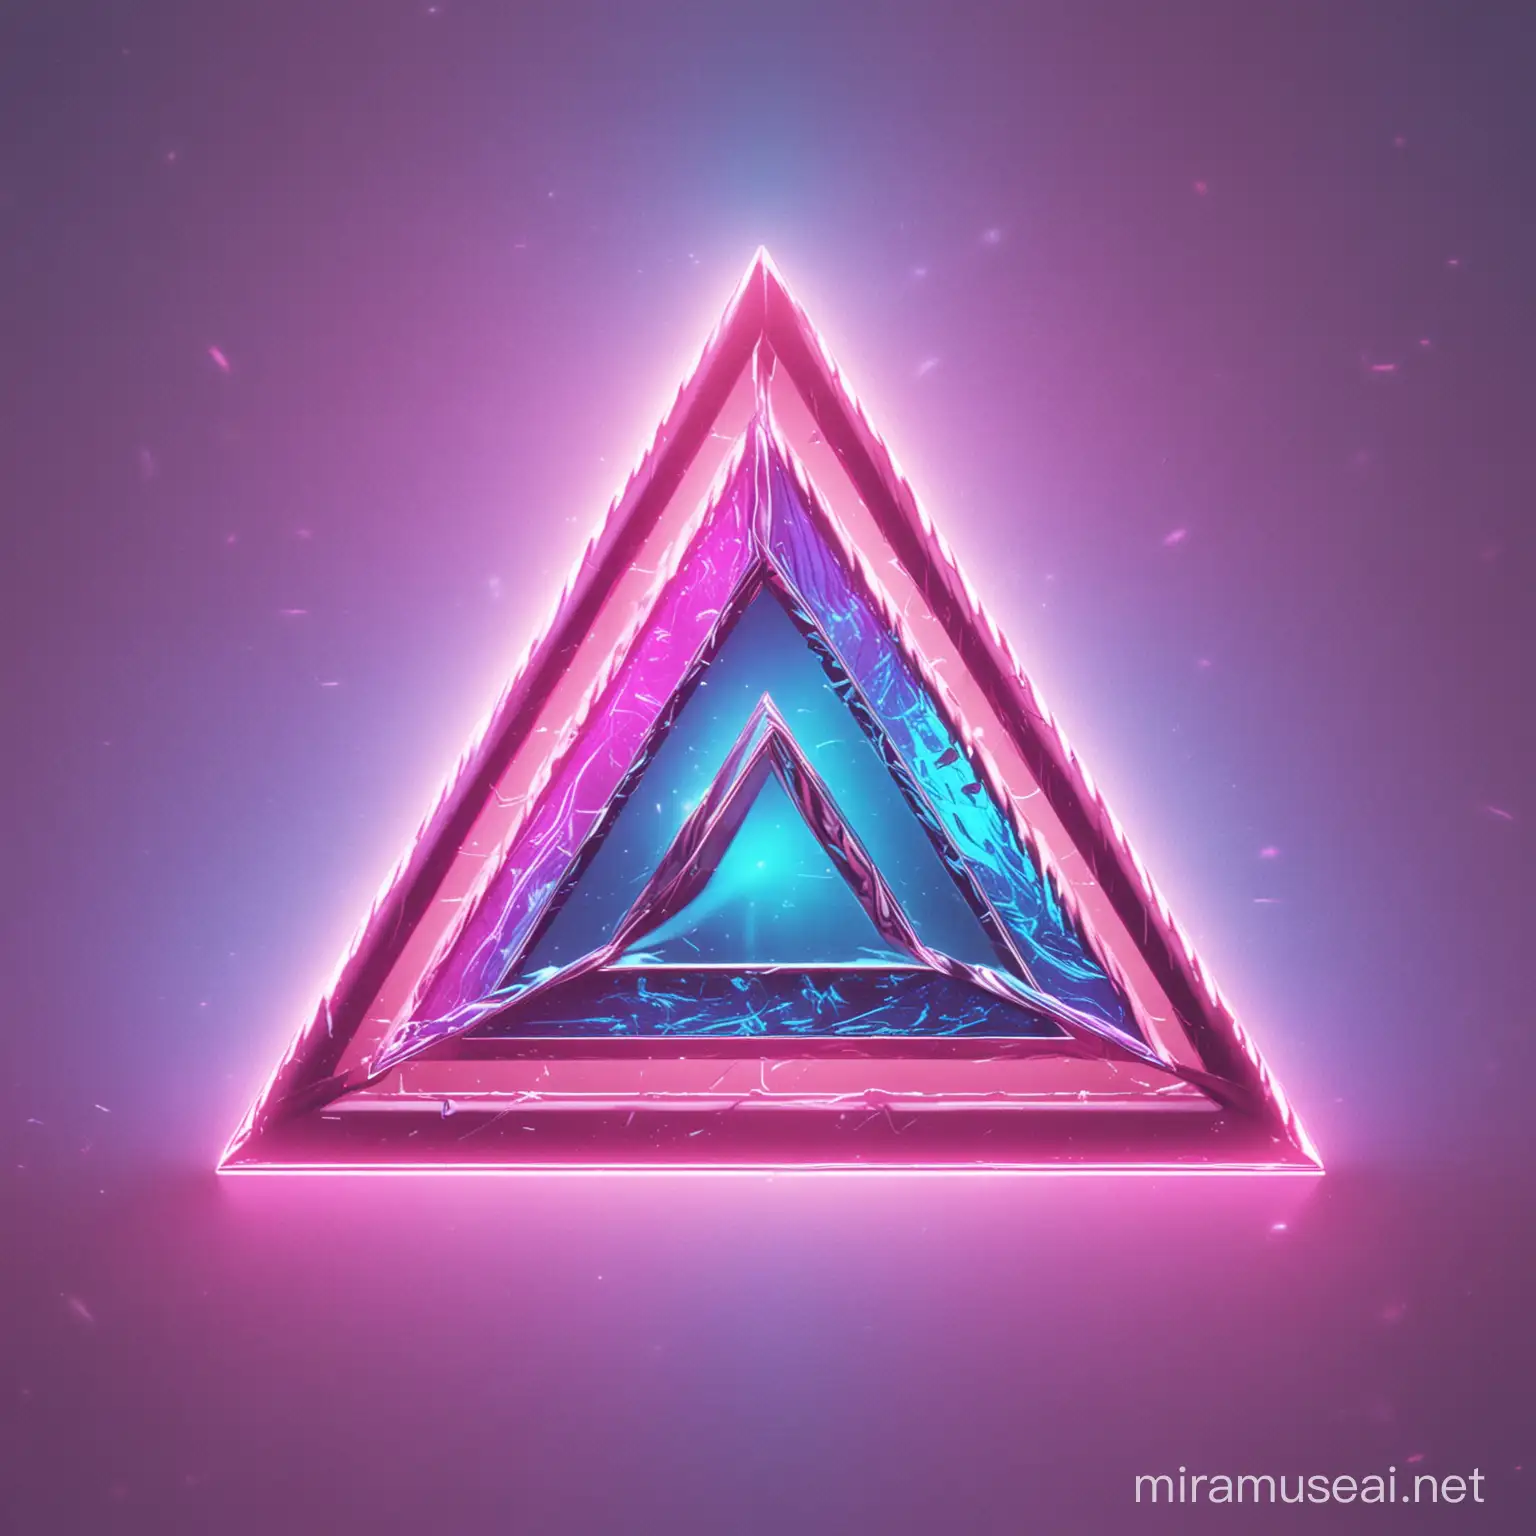 Tringle logo in vaporwave style. The triangle is pink and chrome. Pink and blue lights around. The logo is shiny.